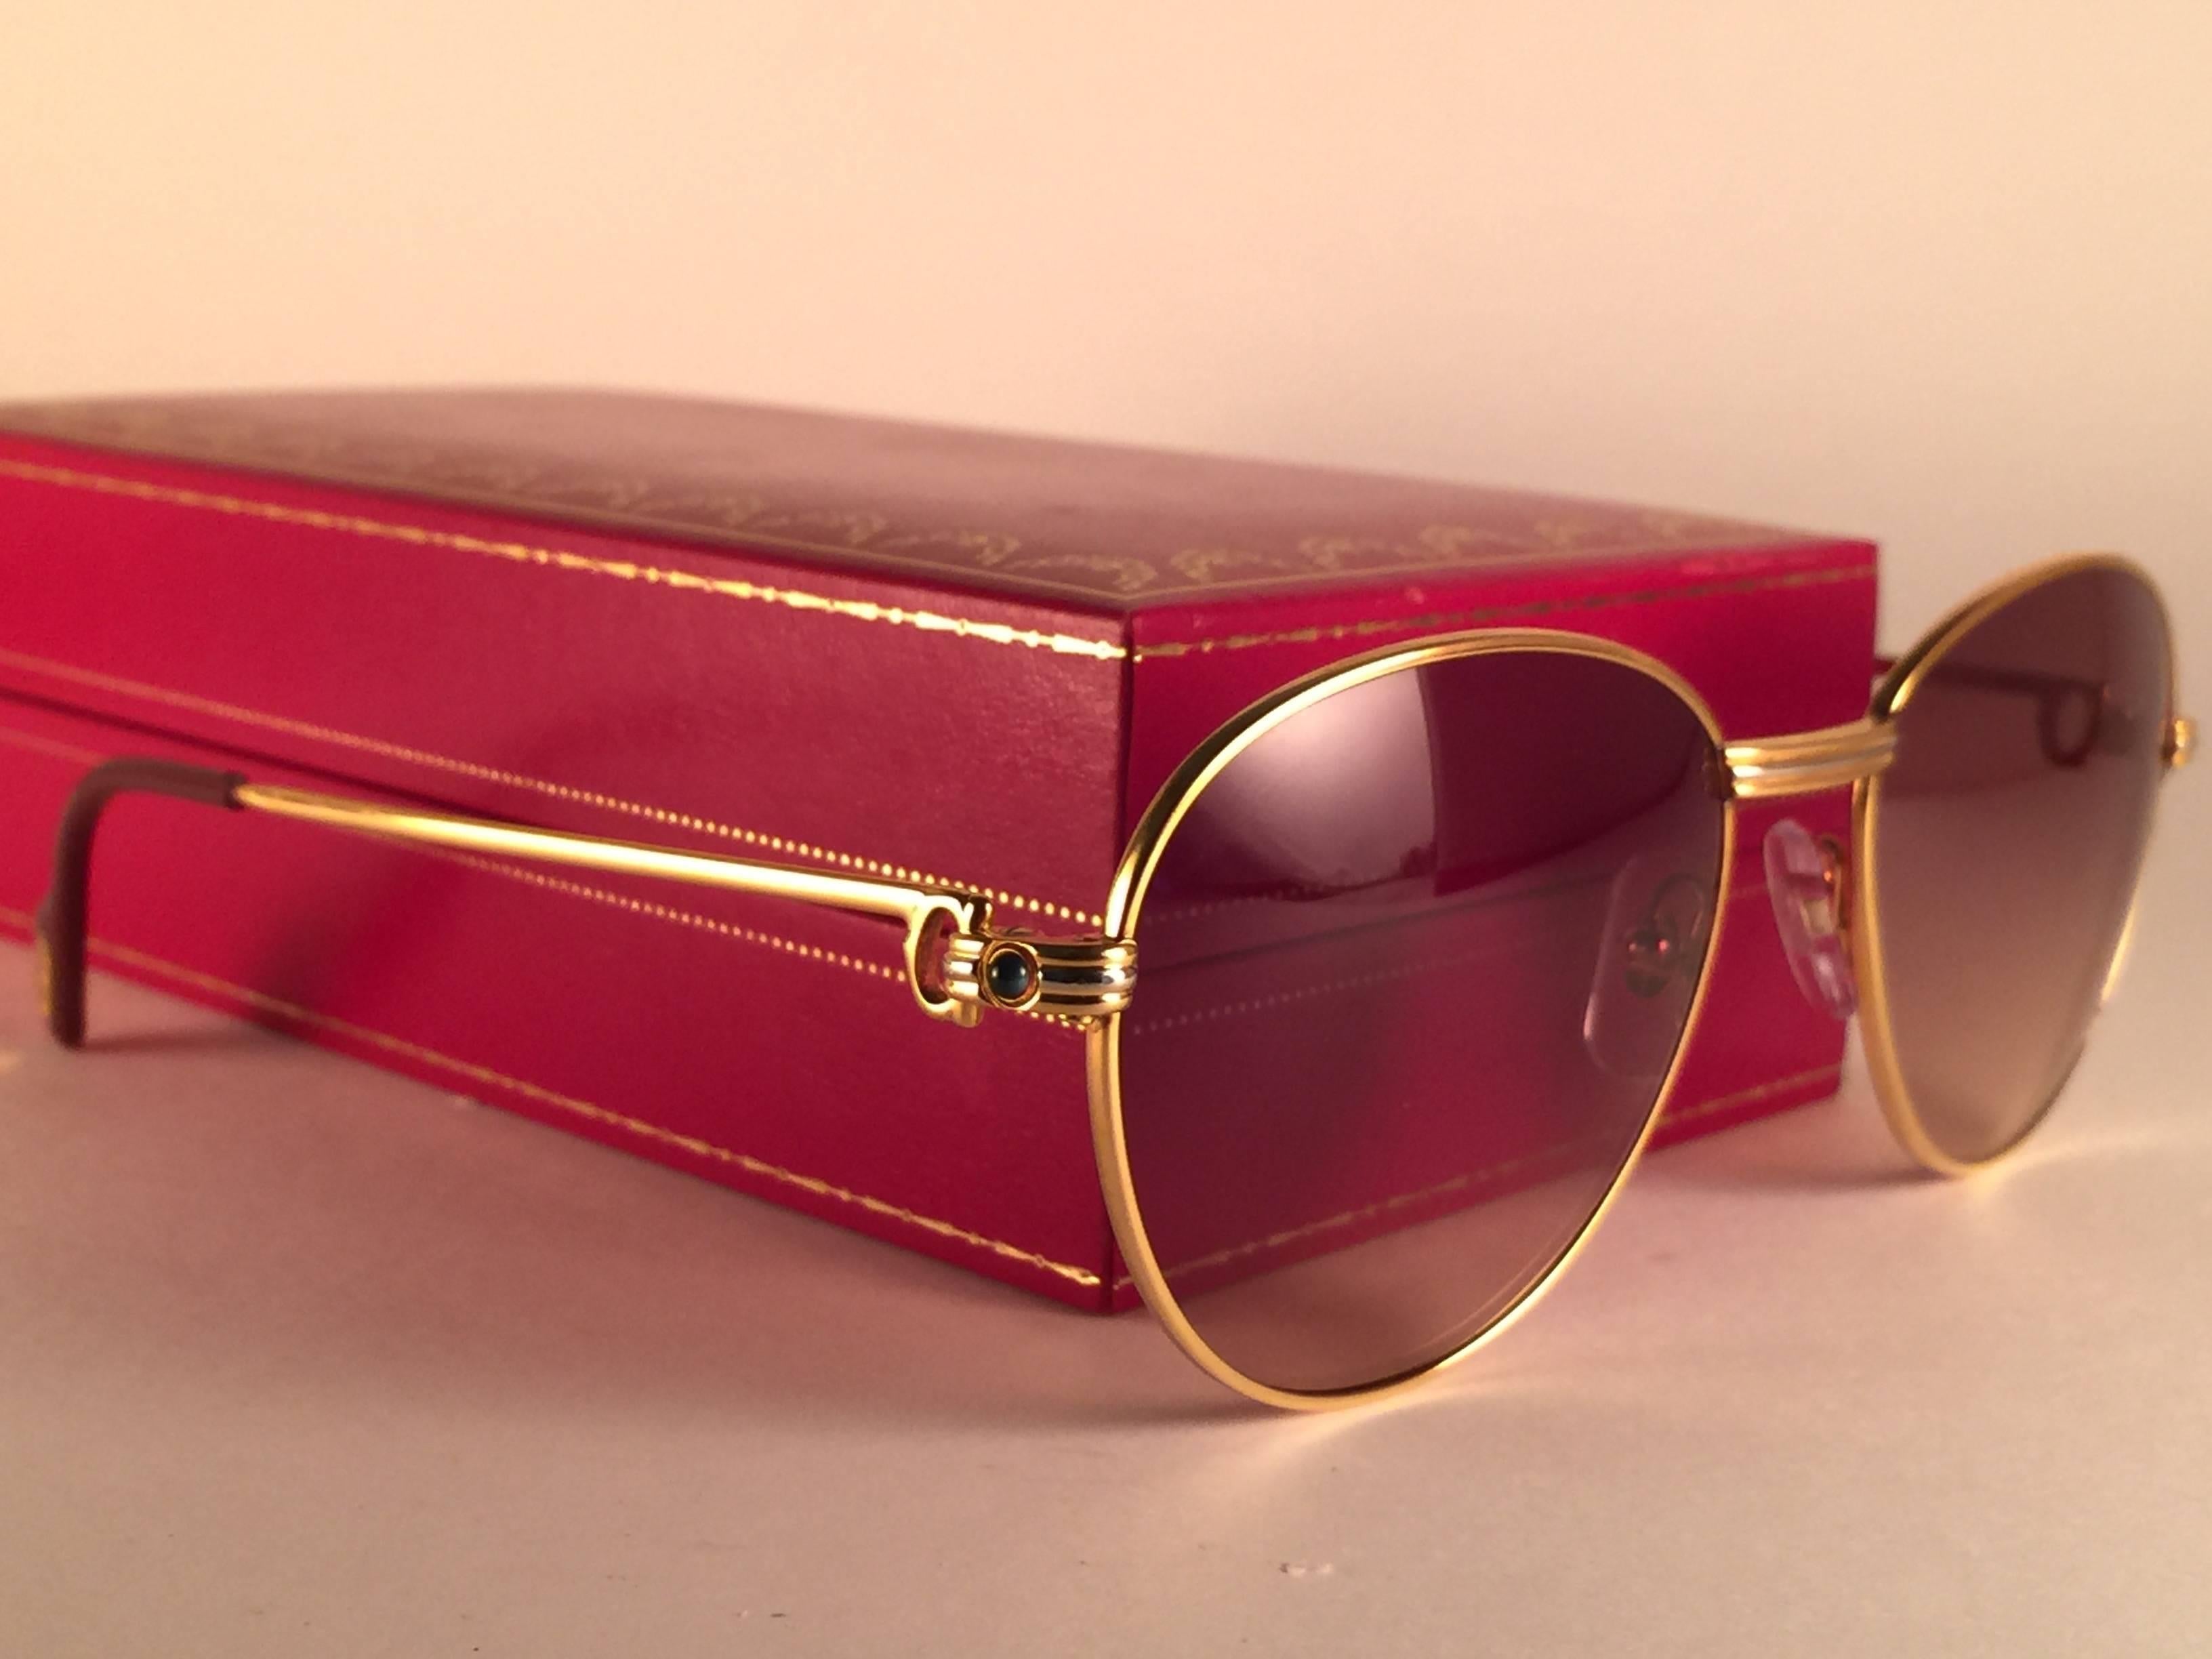 New Vintage Cartier Louis Sapphire 55mm Sunglasses Heavy Gold Plated 18k France 1